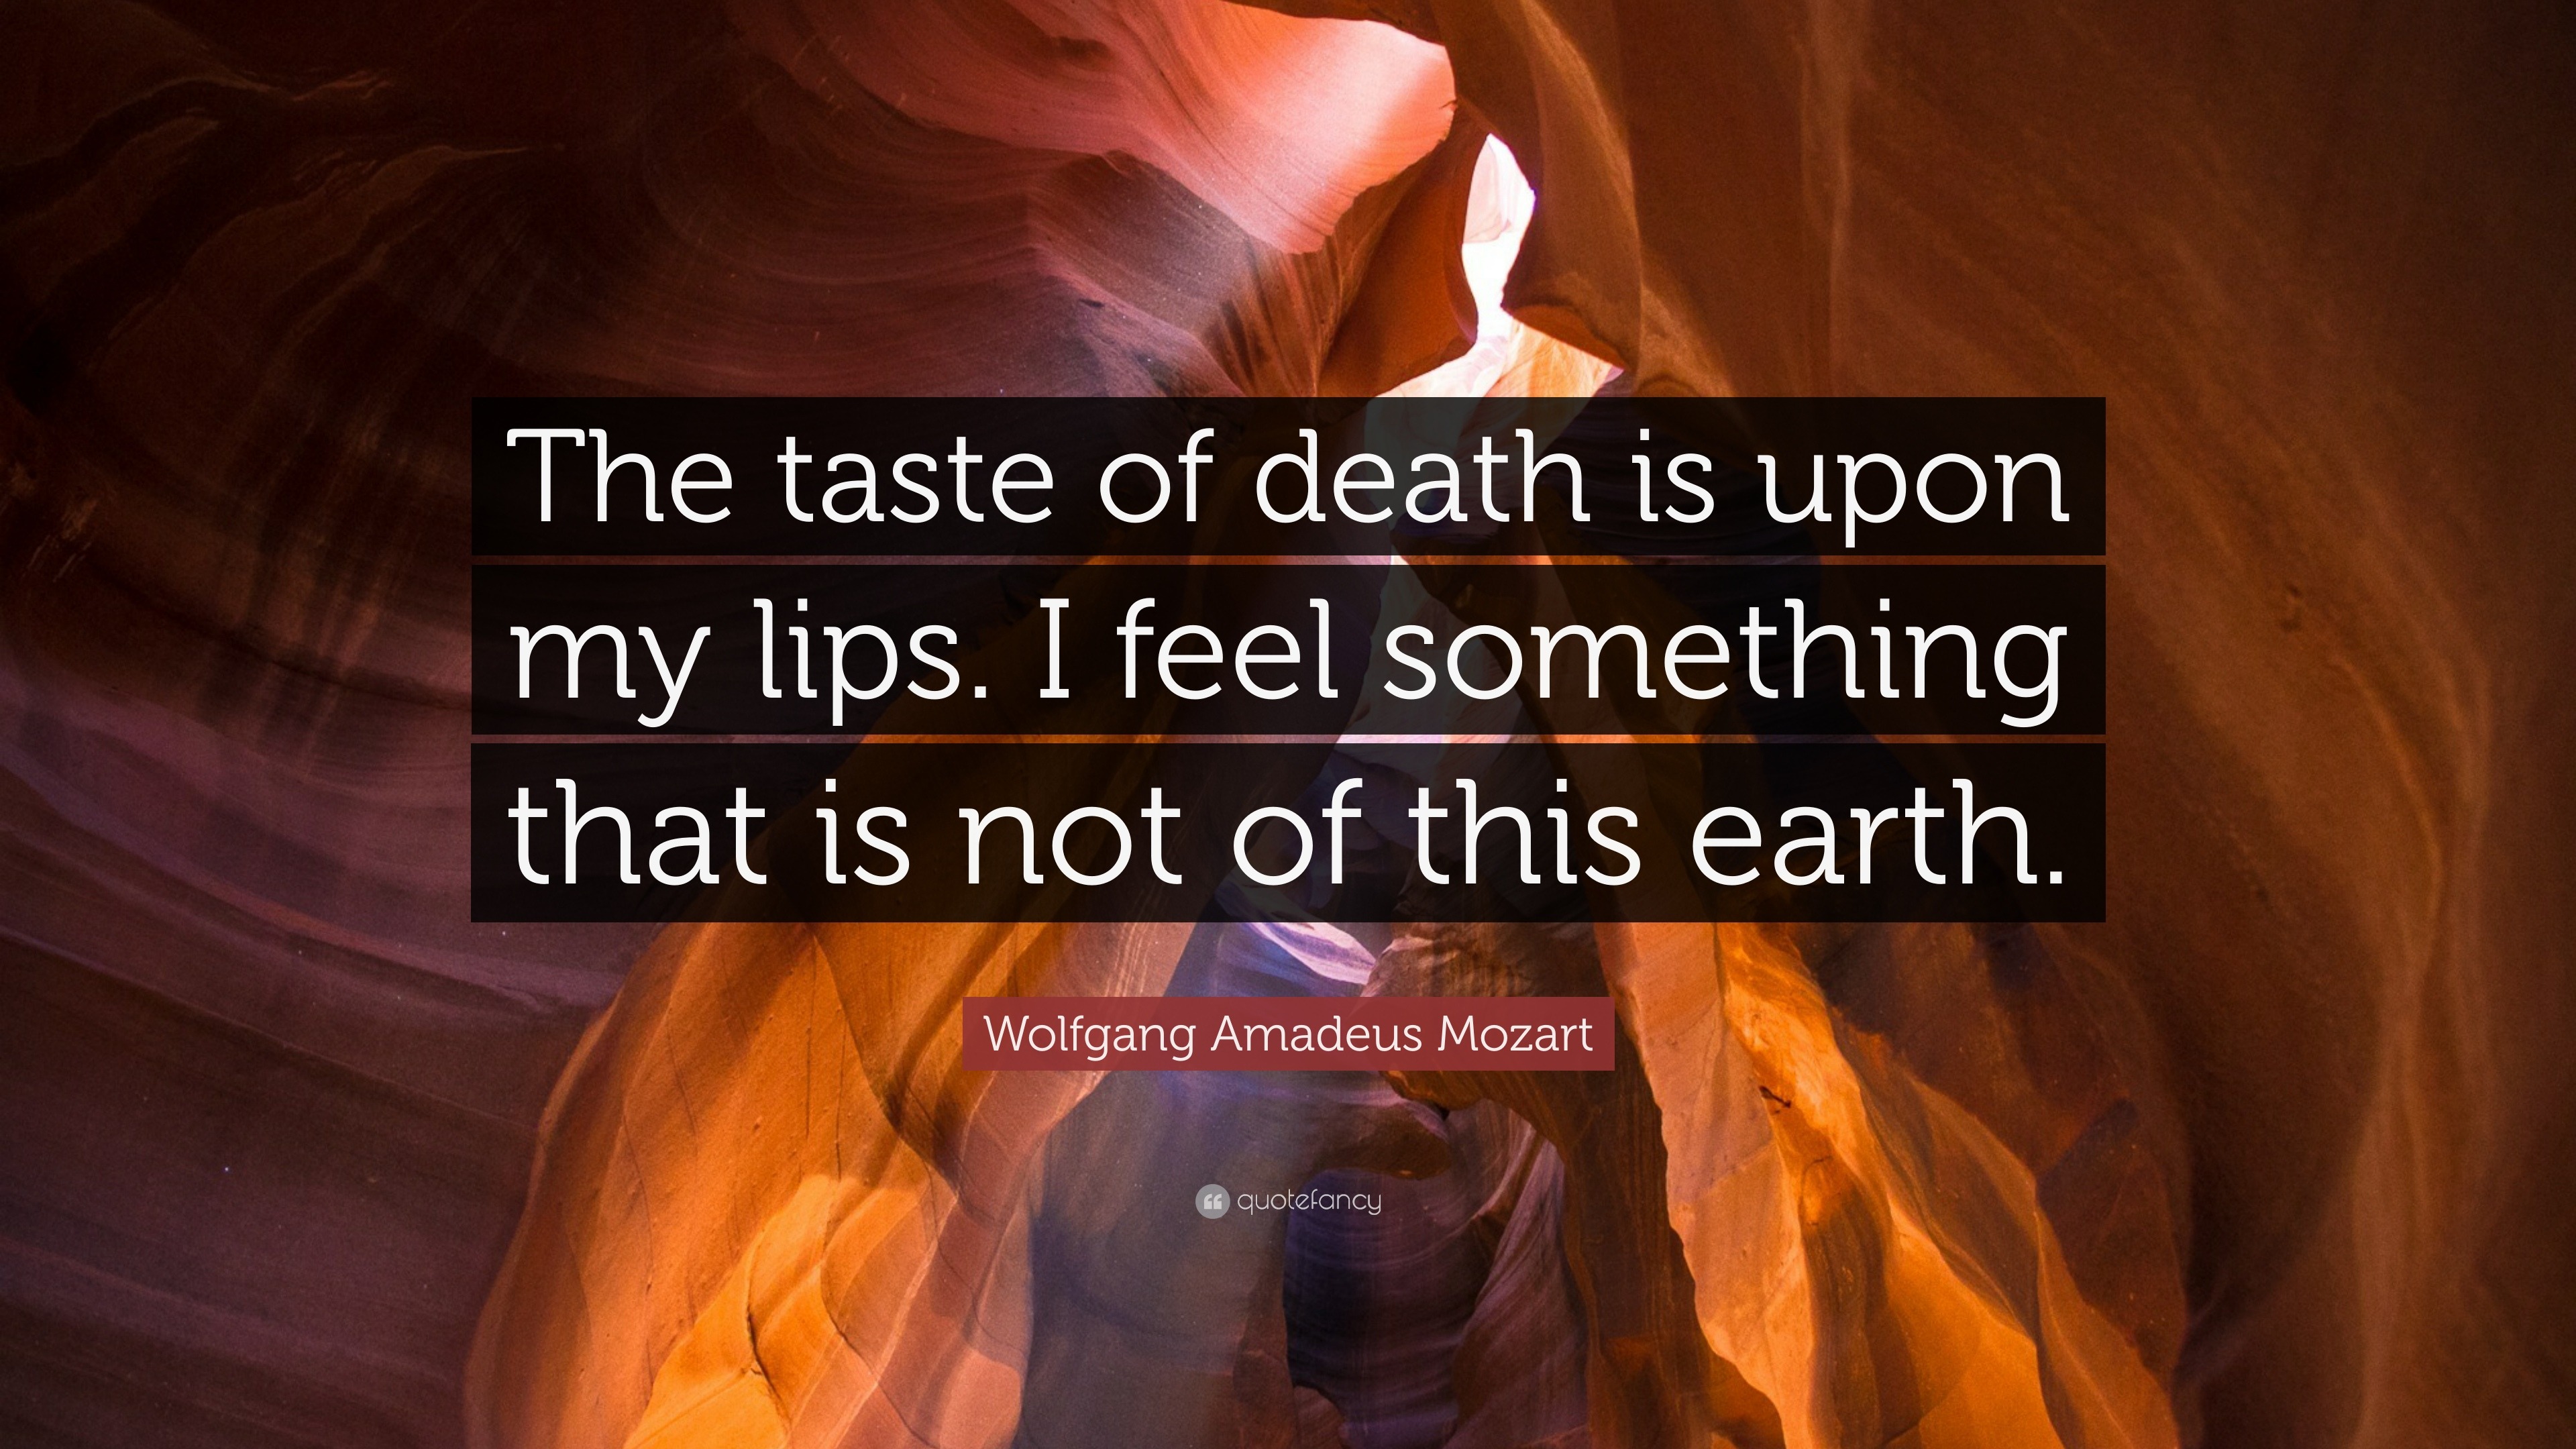 Wolfgang Amadeus Mozart Quote: “The taste of death is upon my lips. I ...